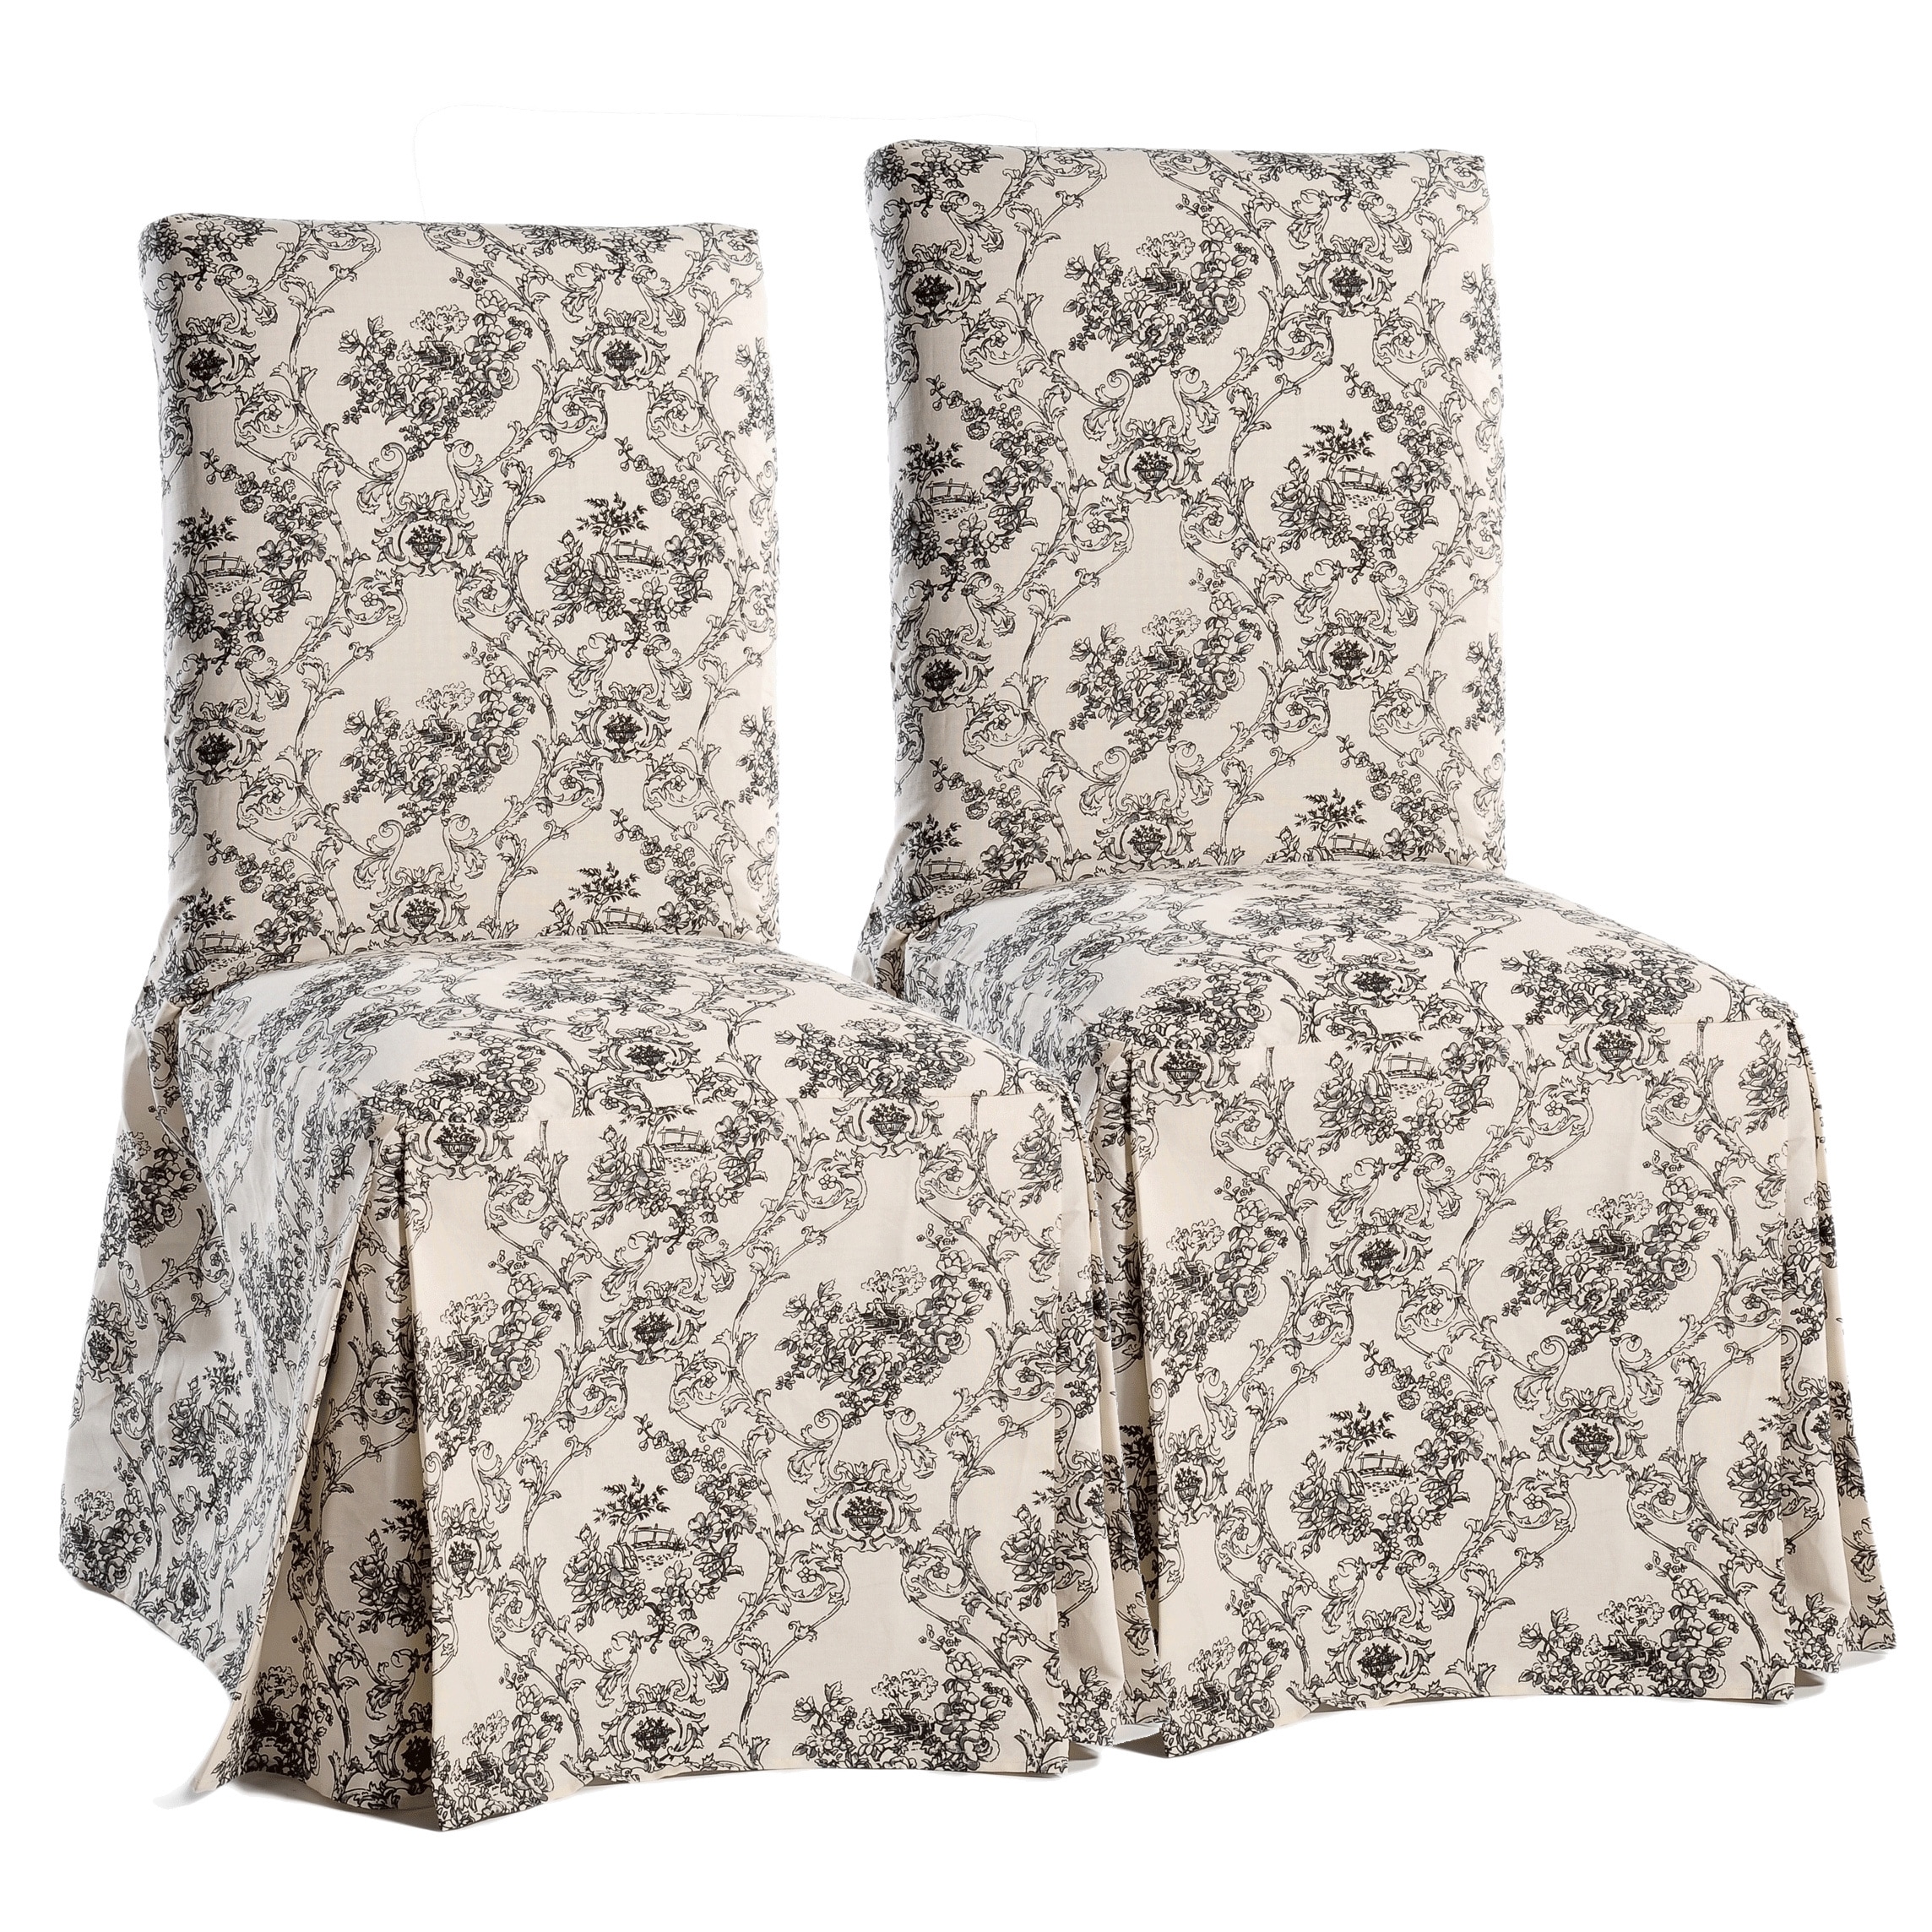 Shop Classic Slipcovers Toile Dining Chair Slipcovers (Set of 2) - Free